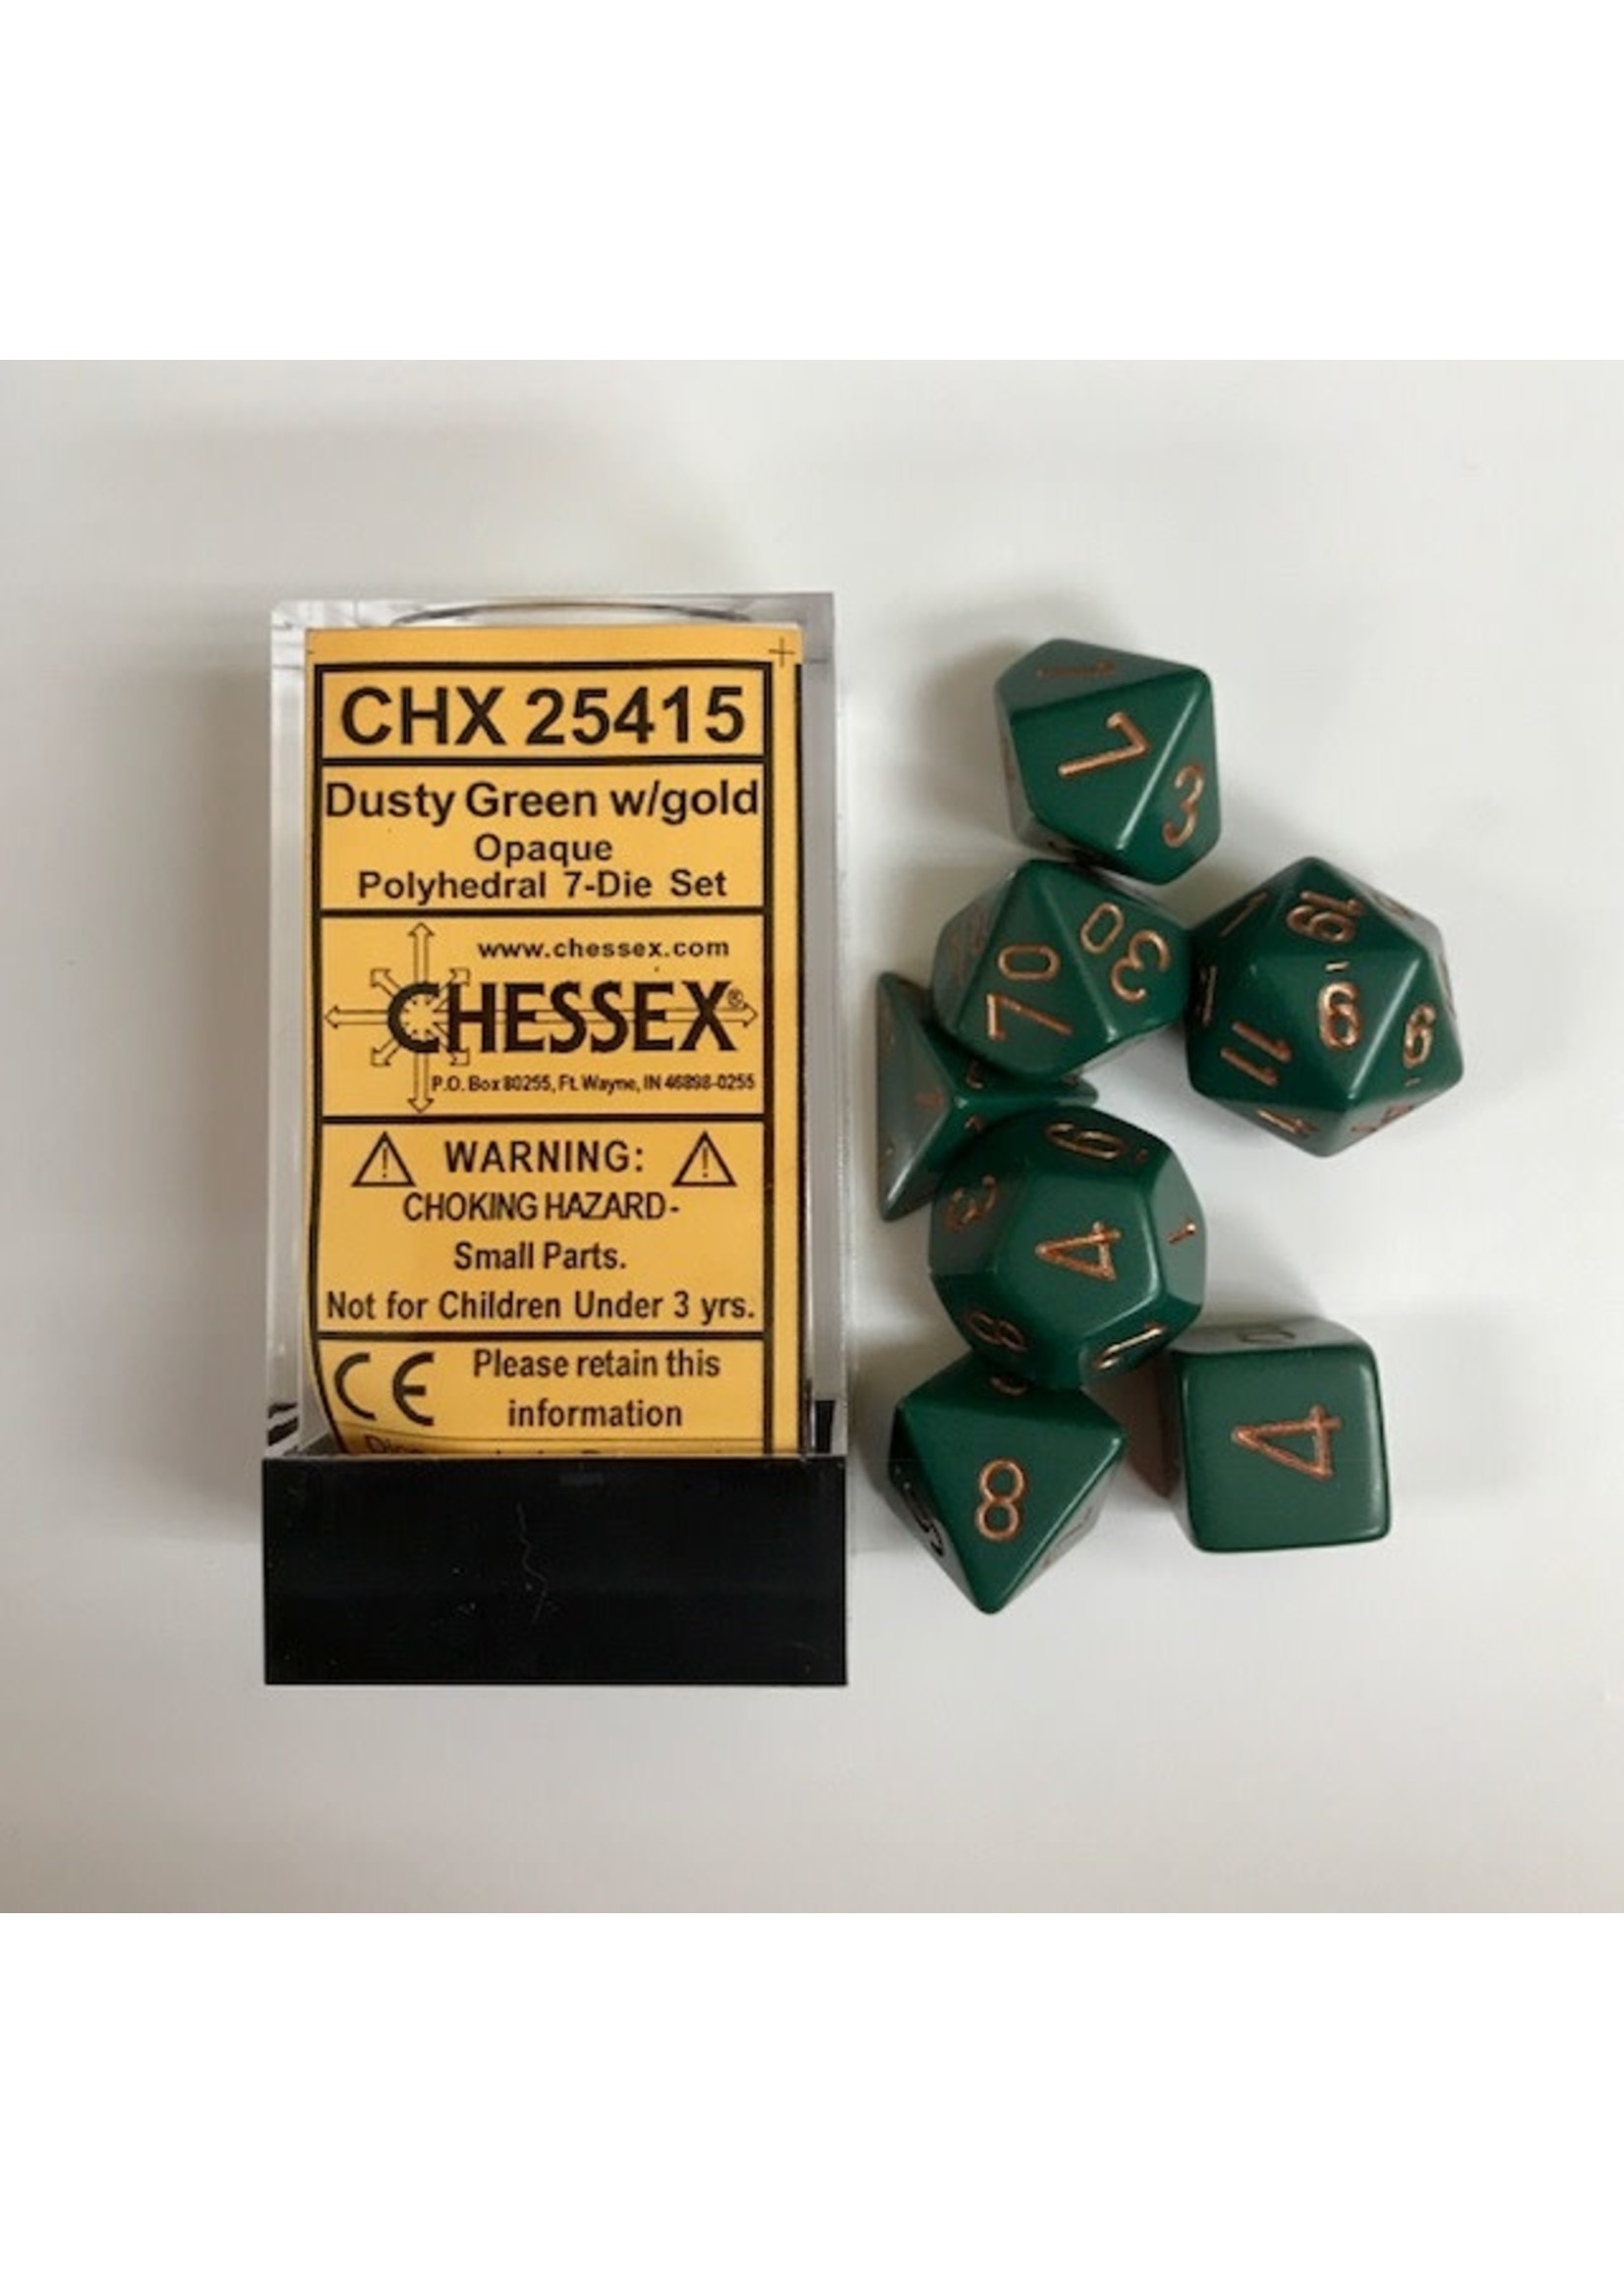 Chessex Opaque Poly 7 set: Dusty Green w/ Gold